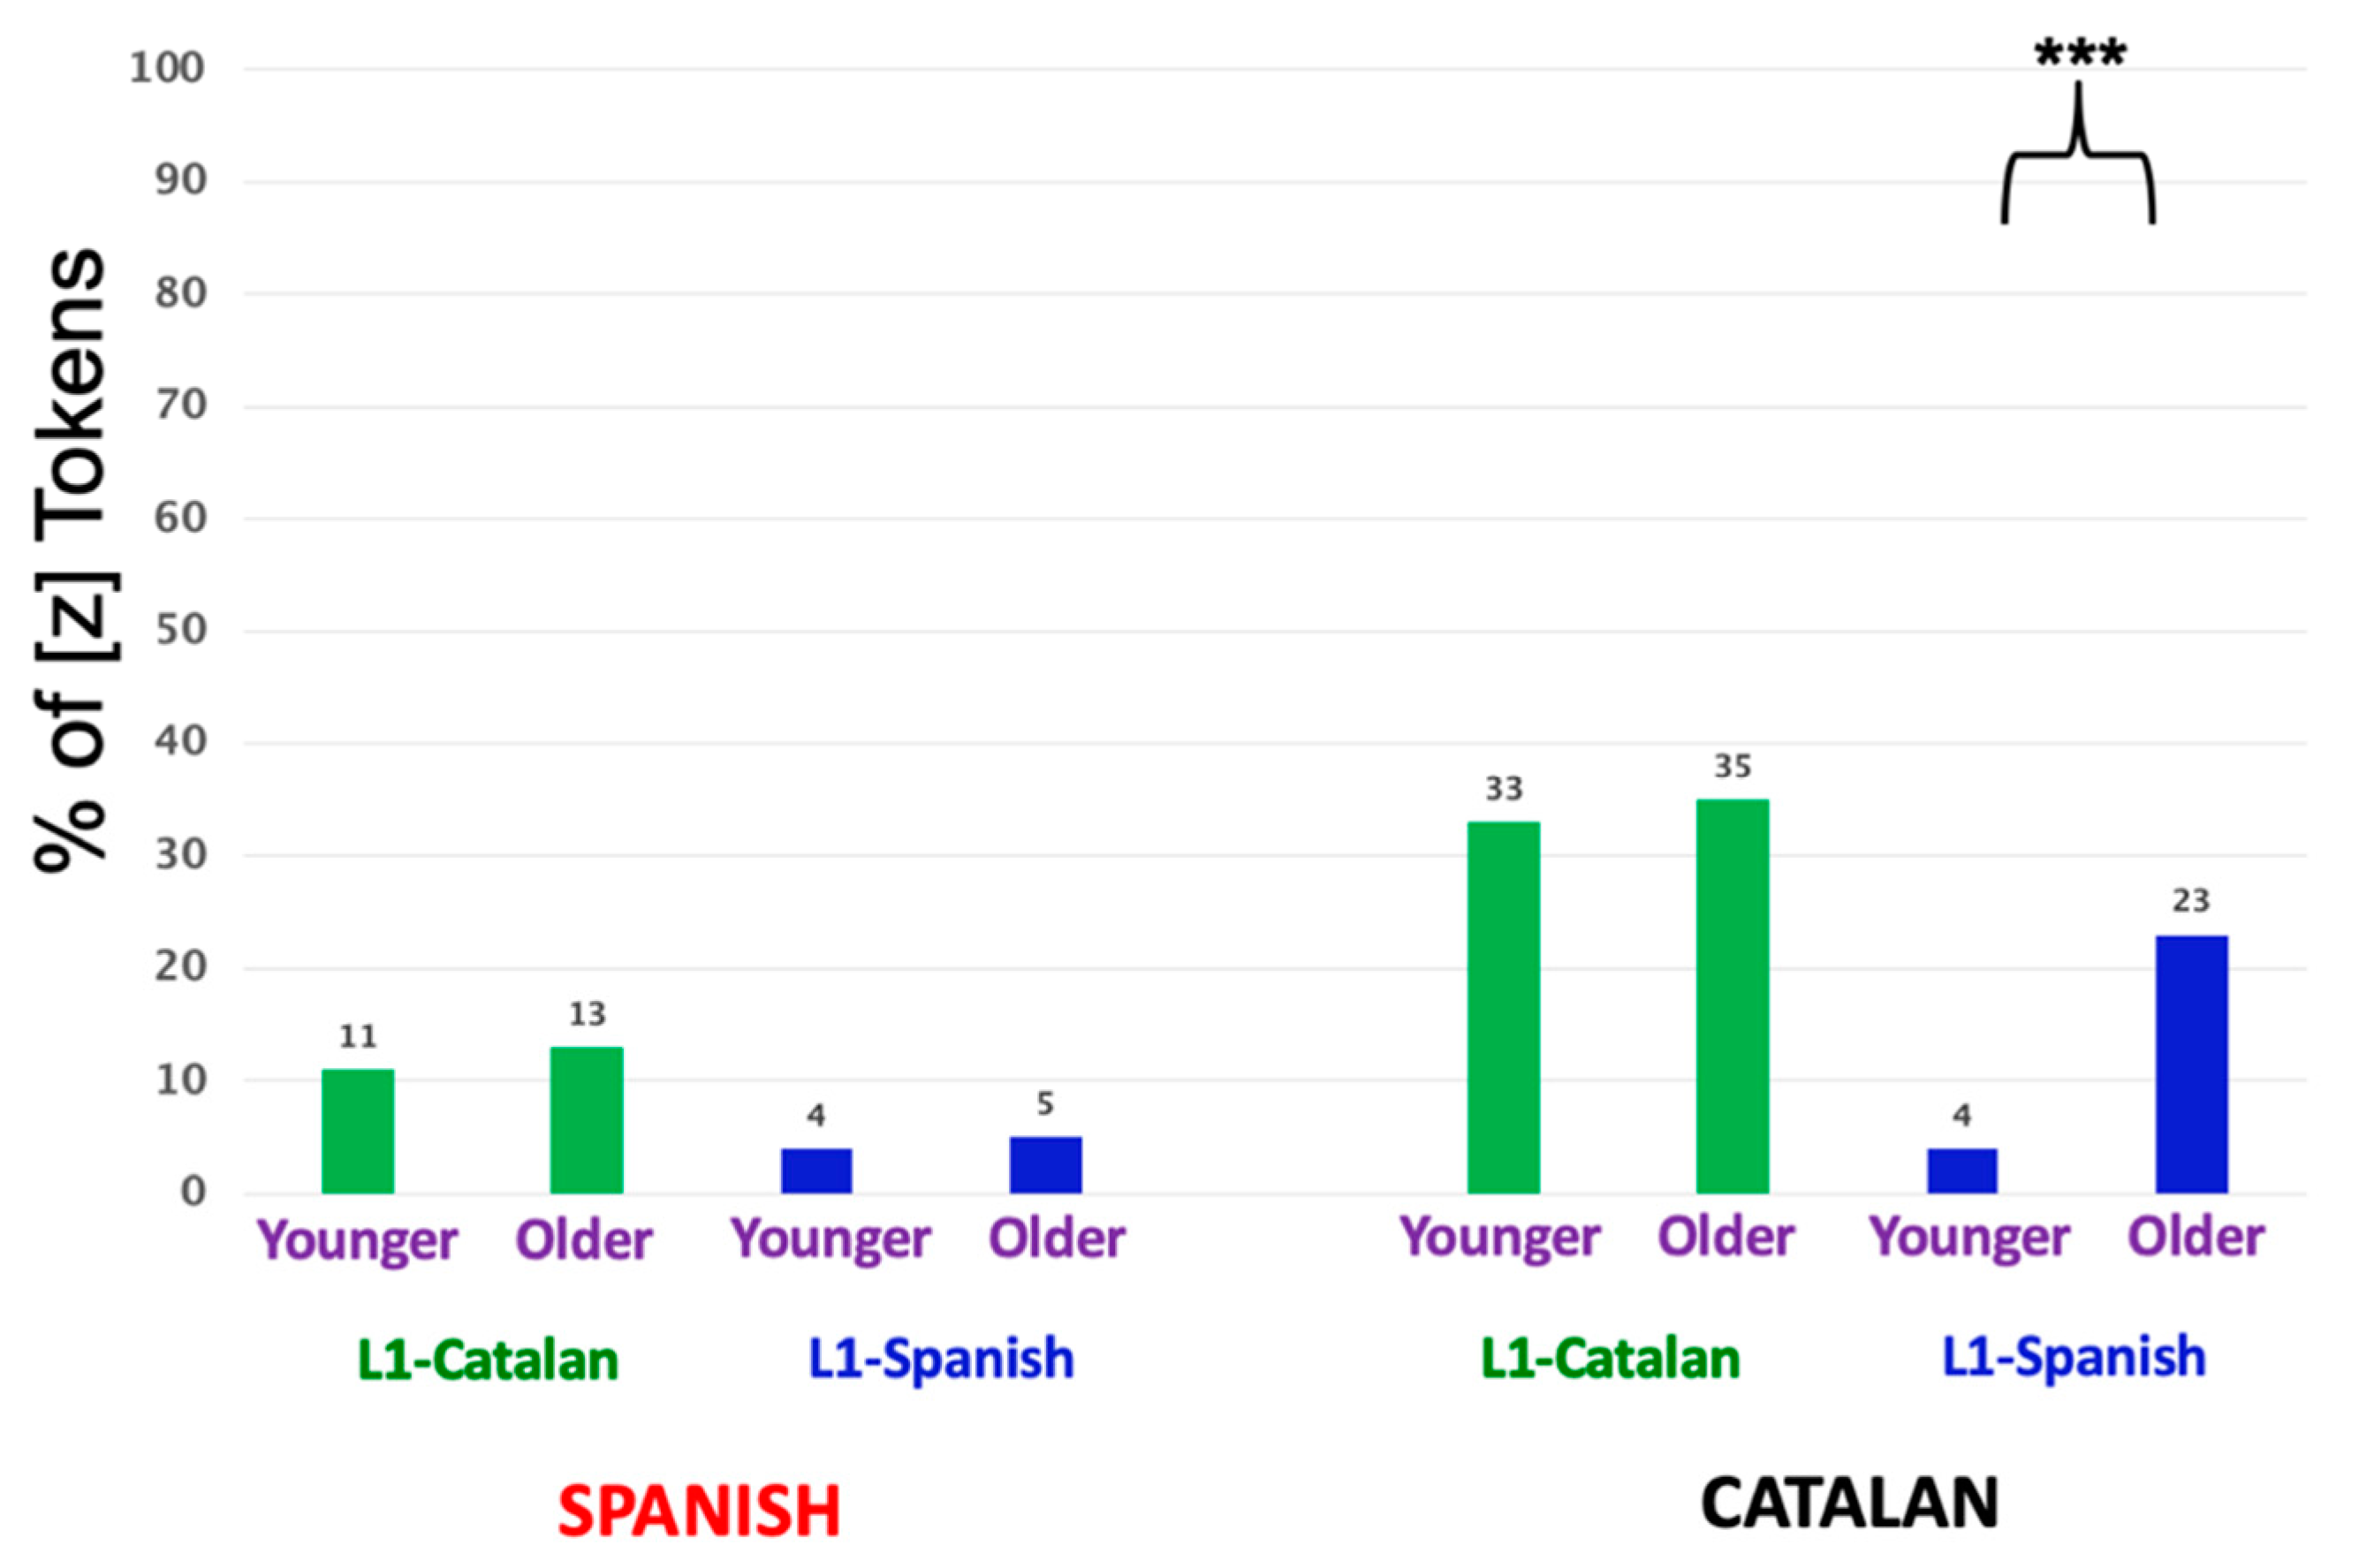 CATALAN LANGUAGE & DIALECTS 